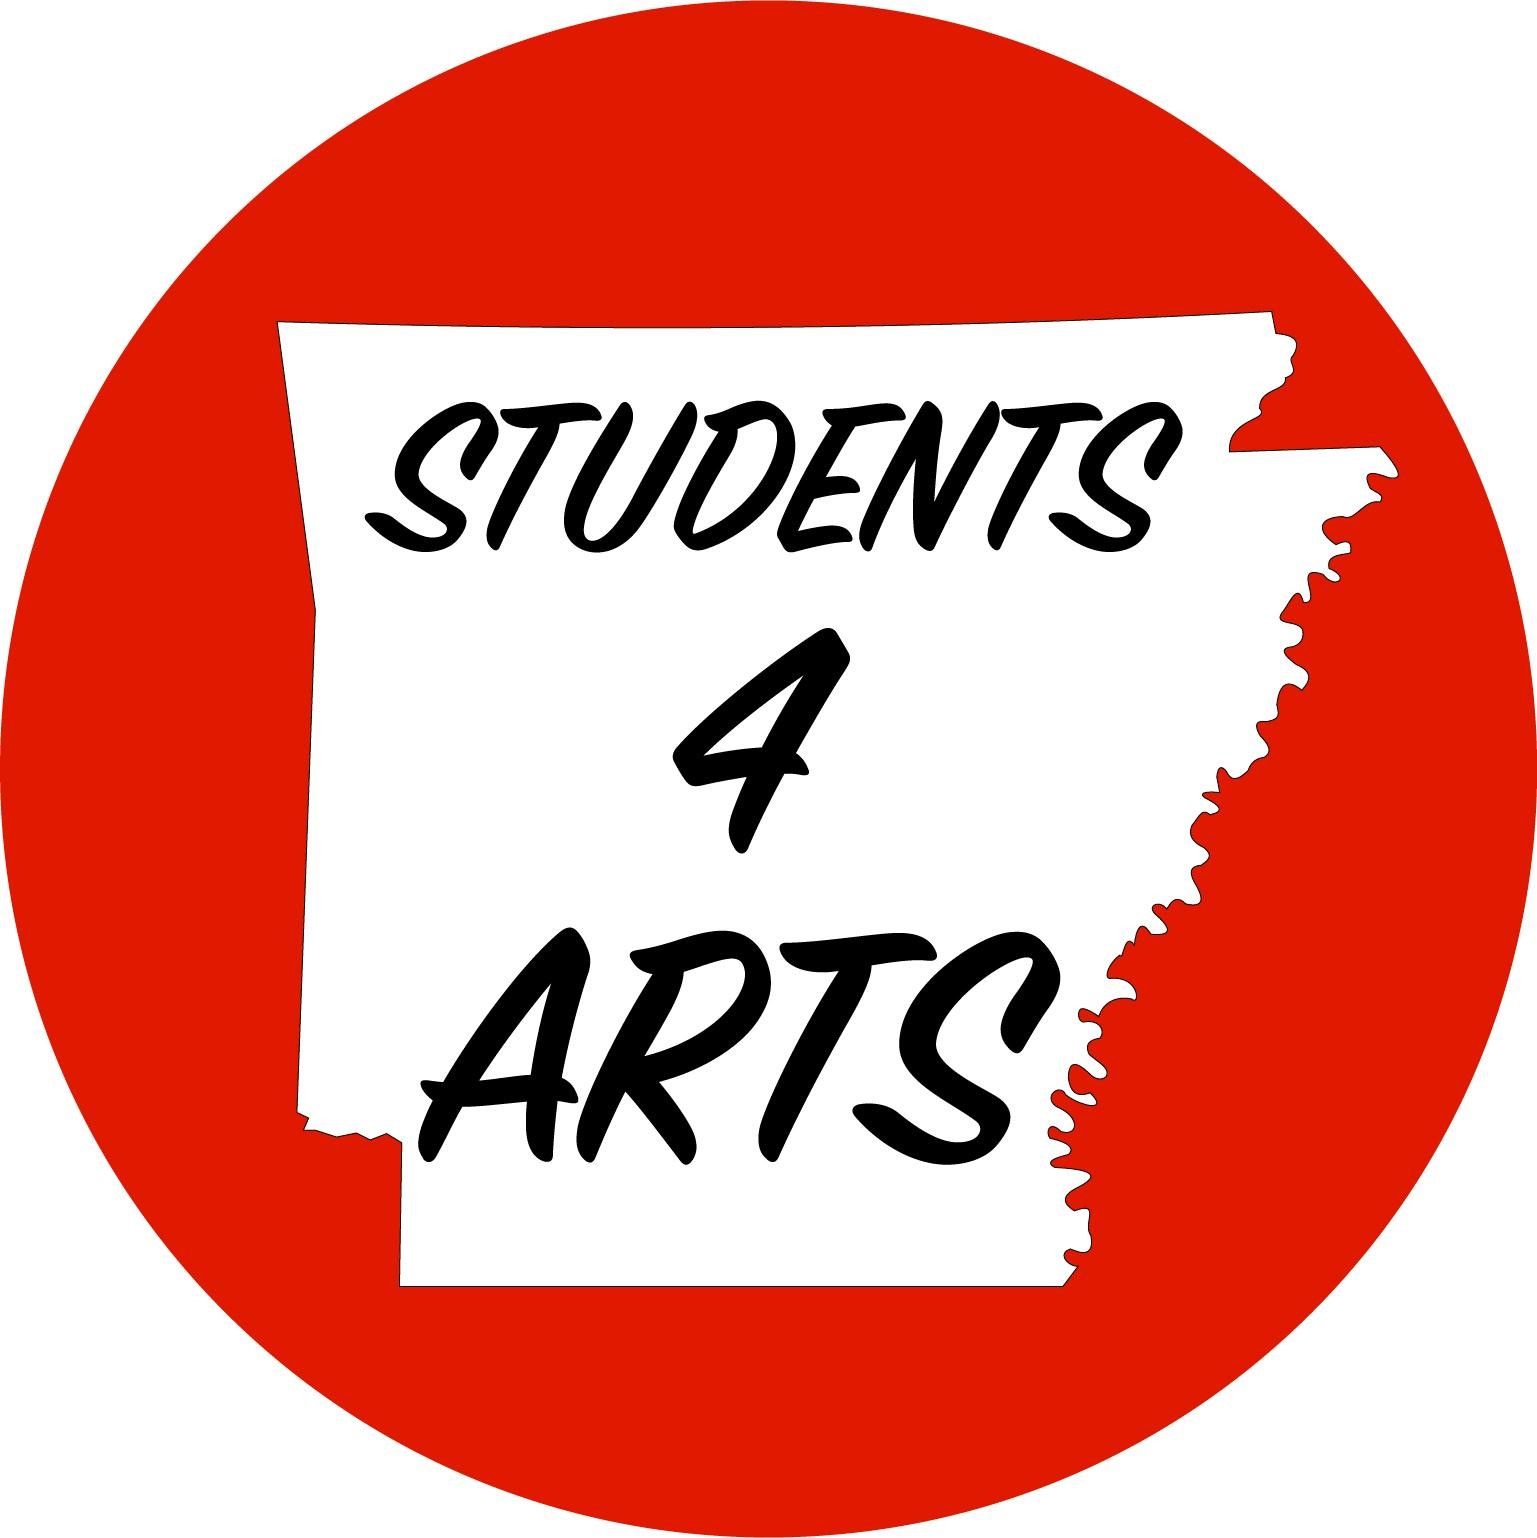 Students for the Arts Logo: A red circle with a white silhouette of the state of Arkansas in the center. Text reads: "Students 4 Arts"